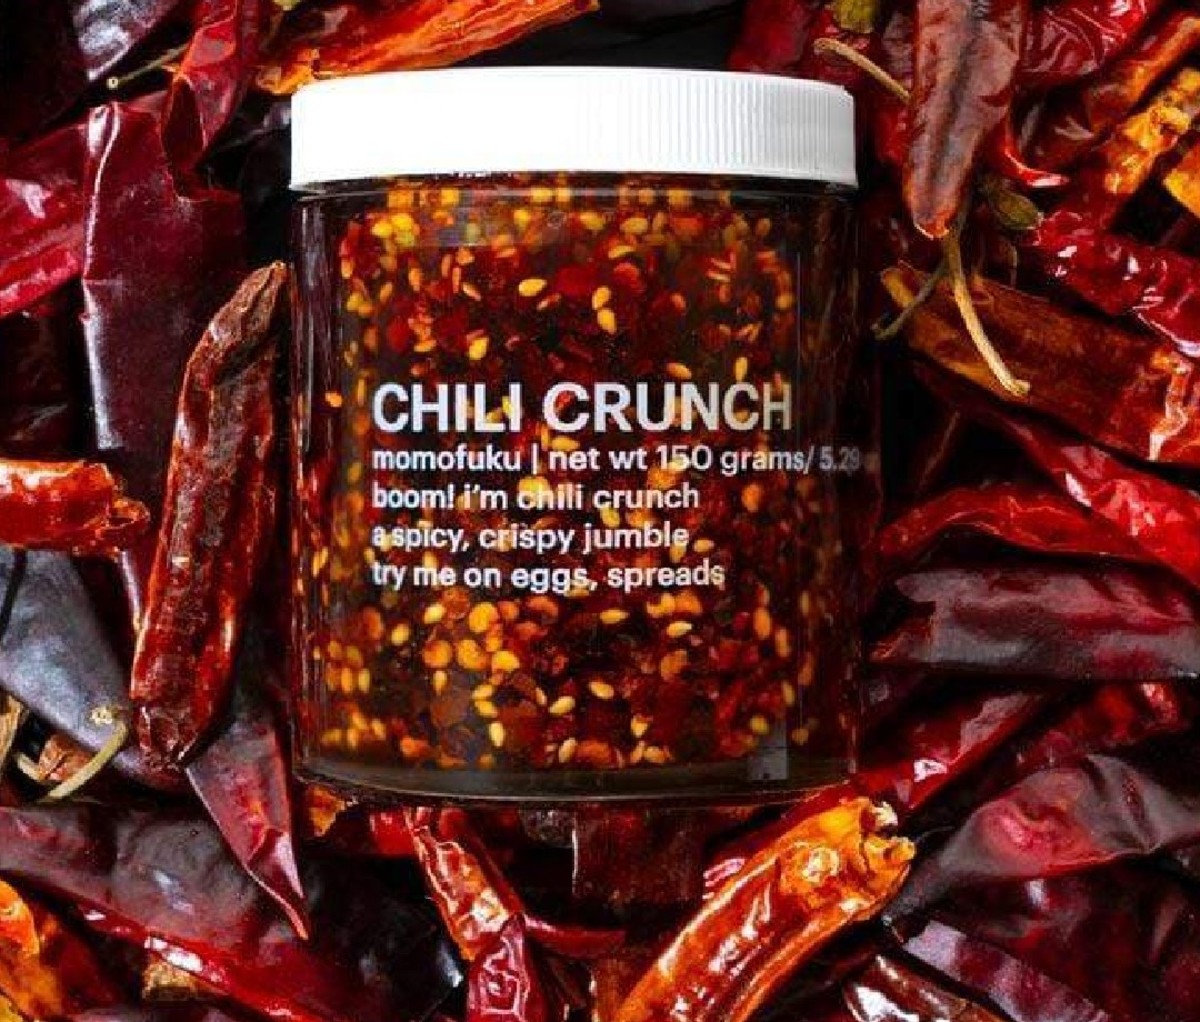 Jar of Momofuku Chili Crunch spice resting in a bed of dried red peppers